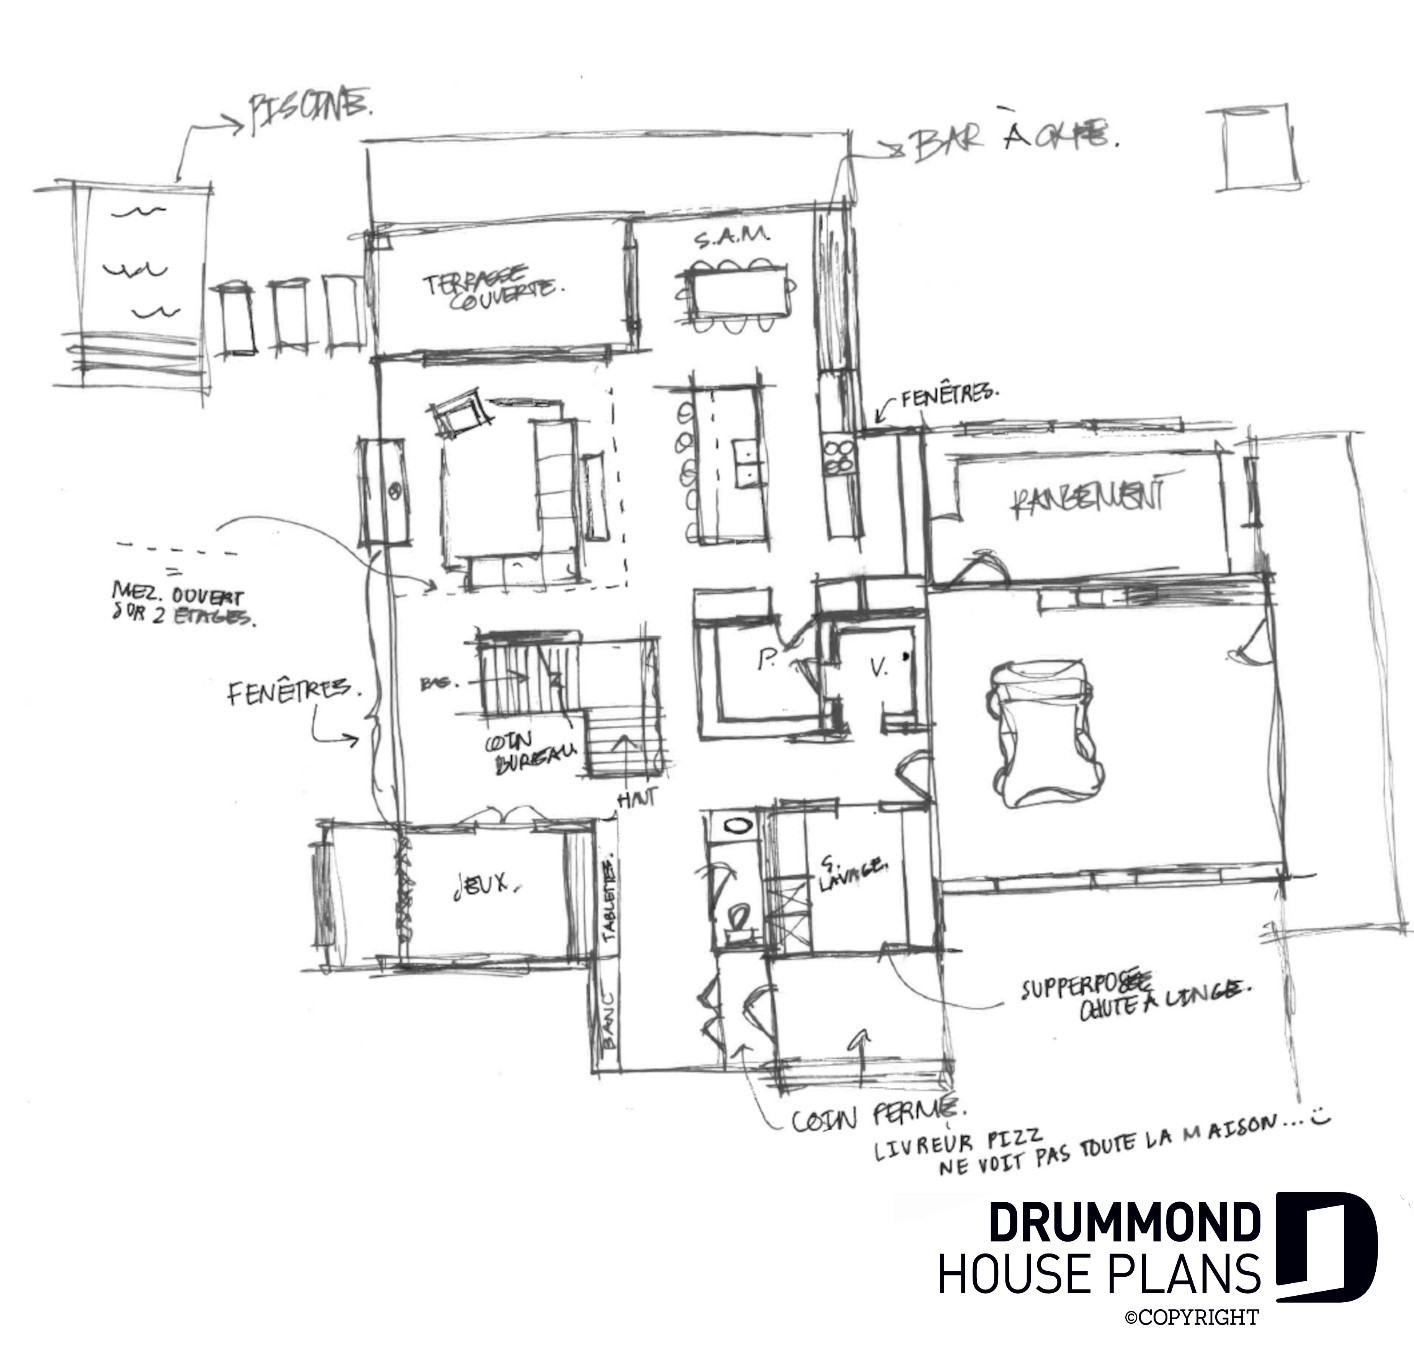 First sketch of future dream Farmhouse House Plan for Alicia Moffet, Canadian singer